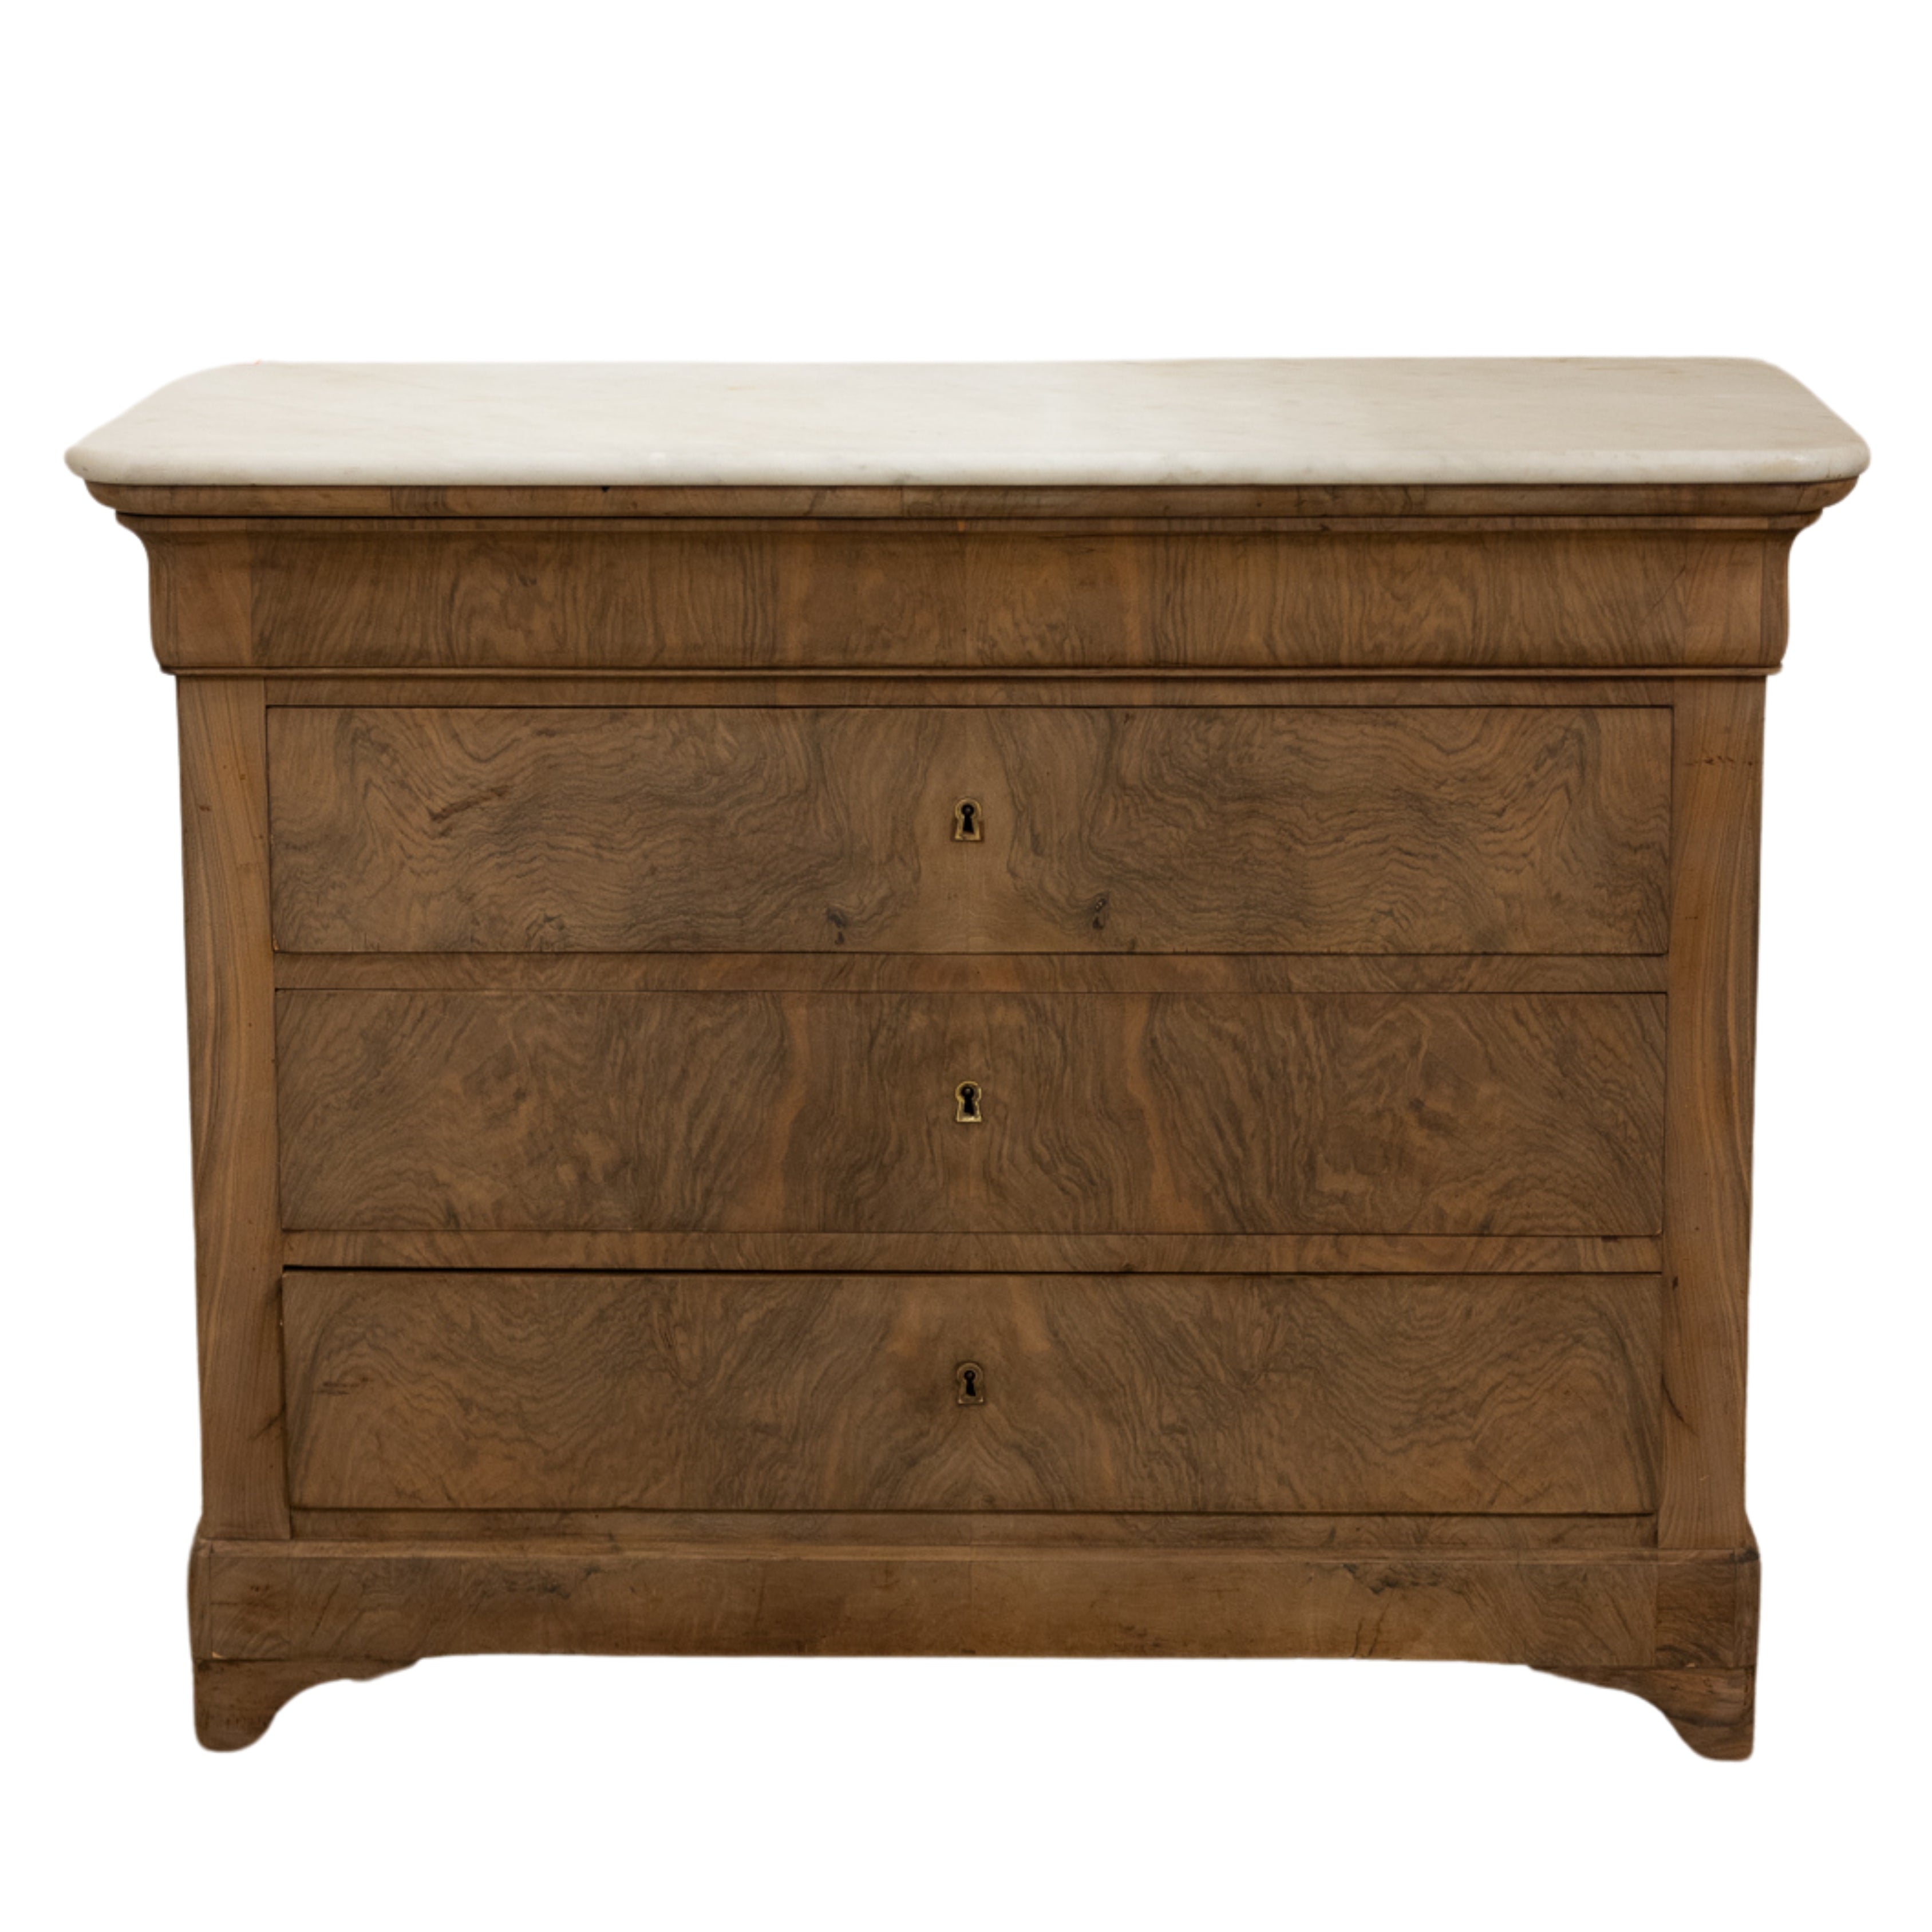 Light Burled Walnut Louis Philippe Commode w/ White Marble 47"L